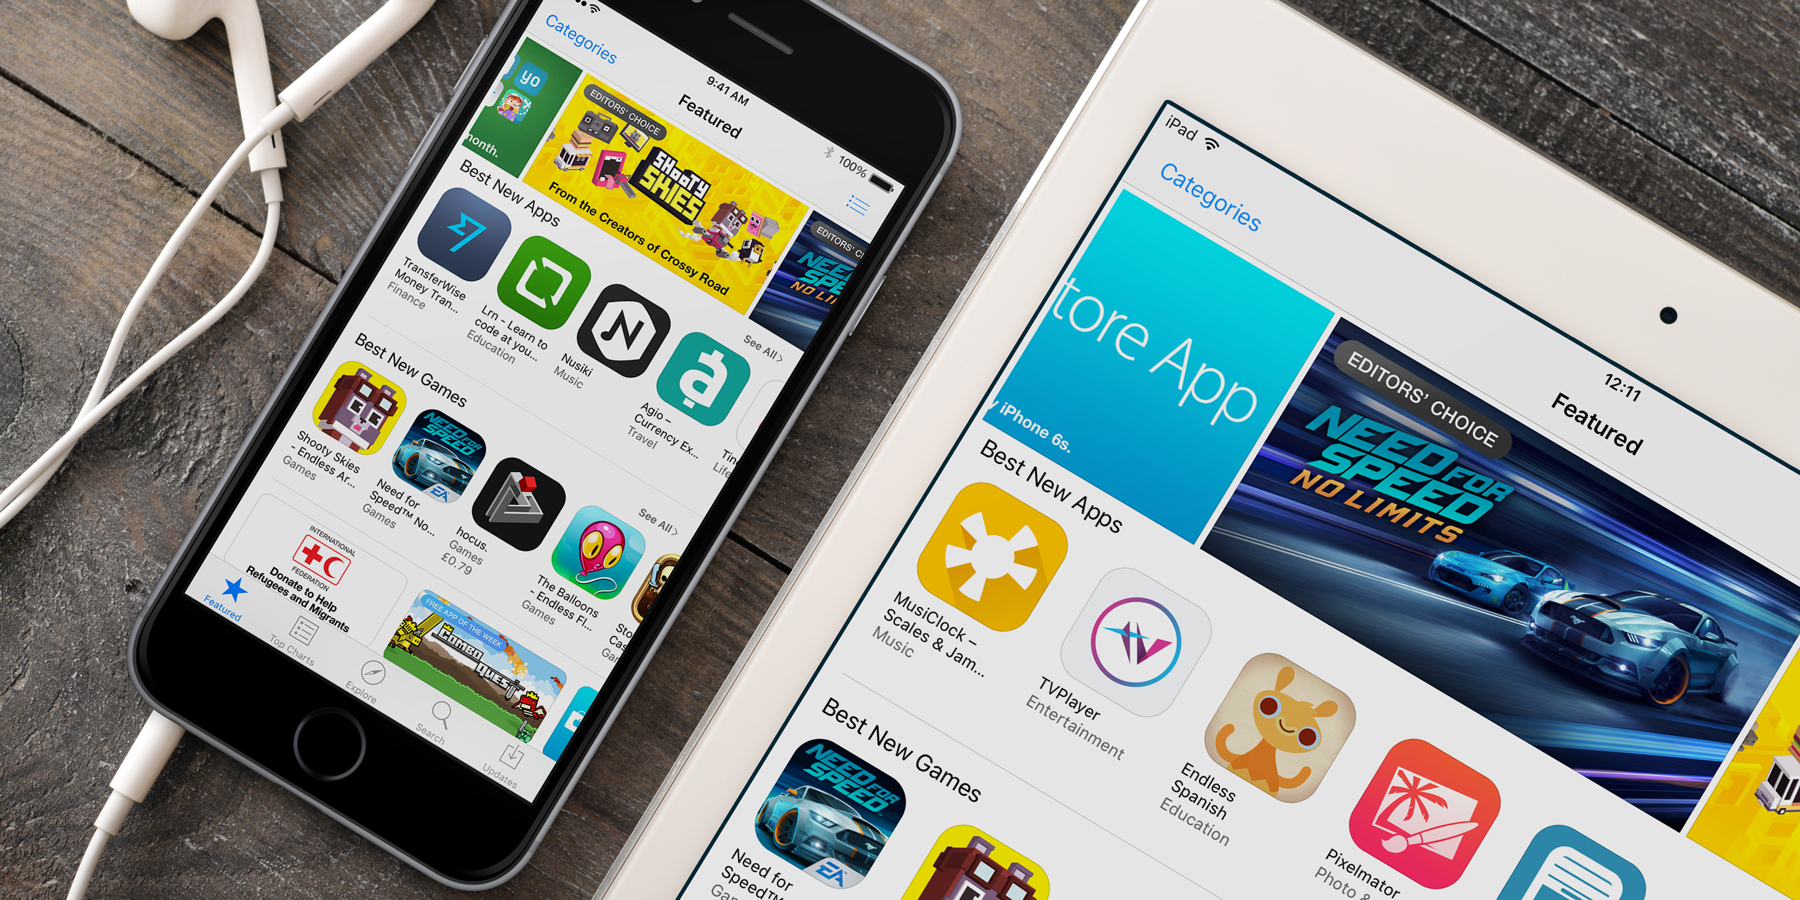 Best new apps